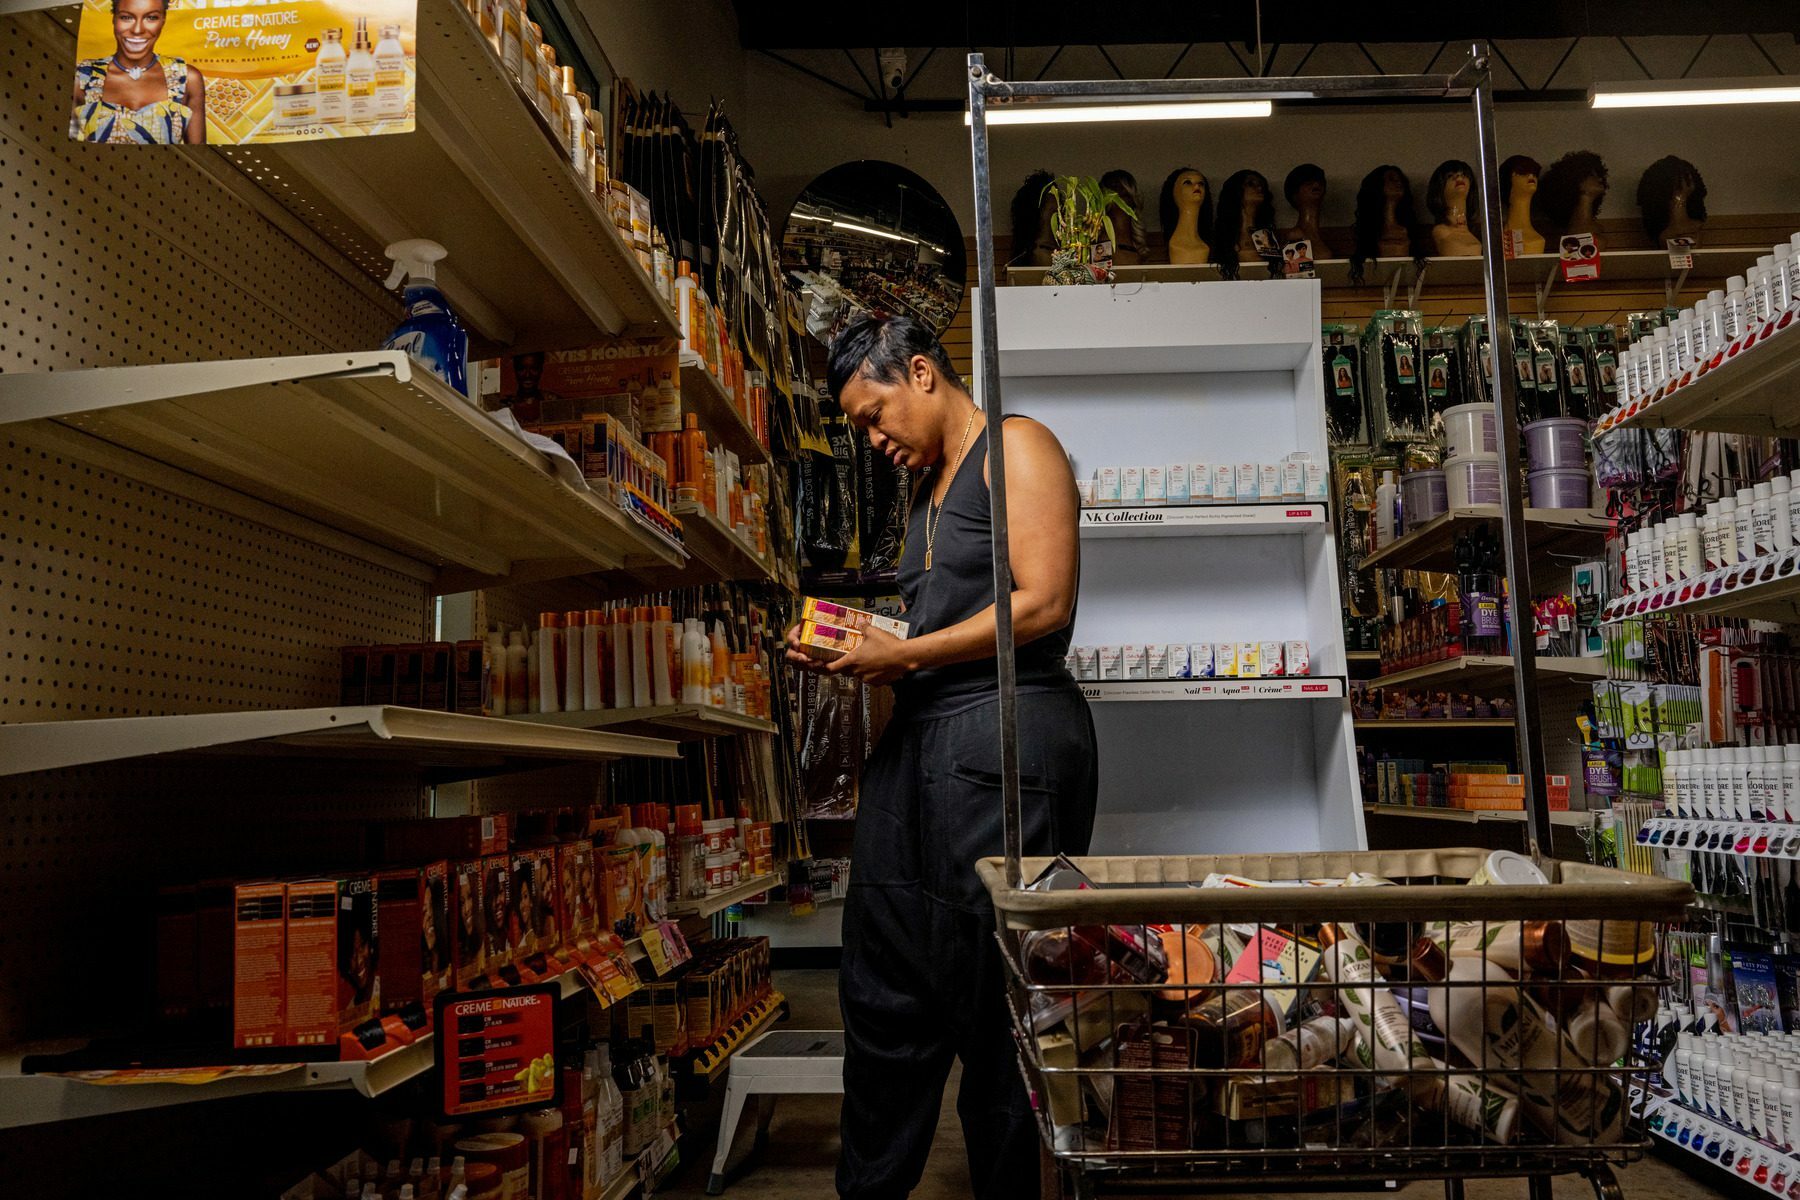 A woman restocks shelves at her business.